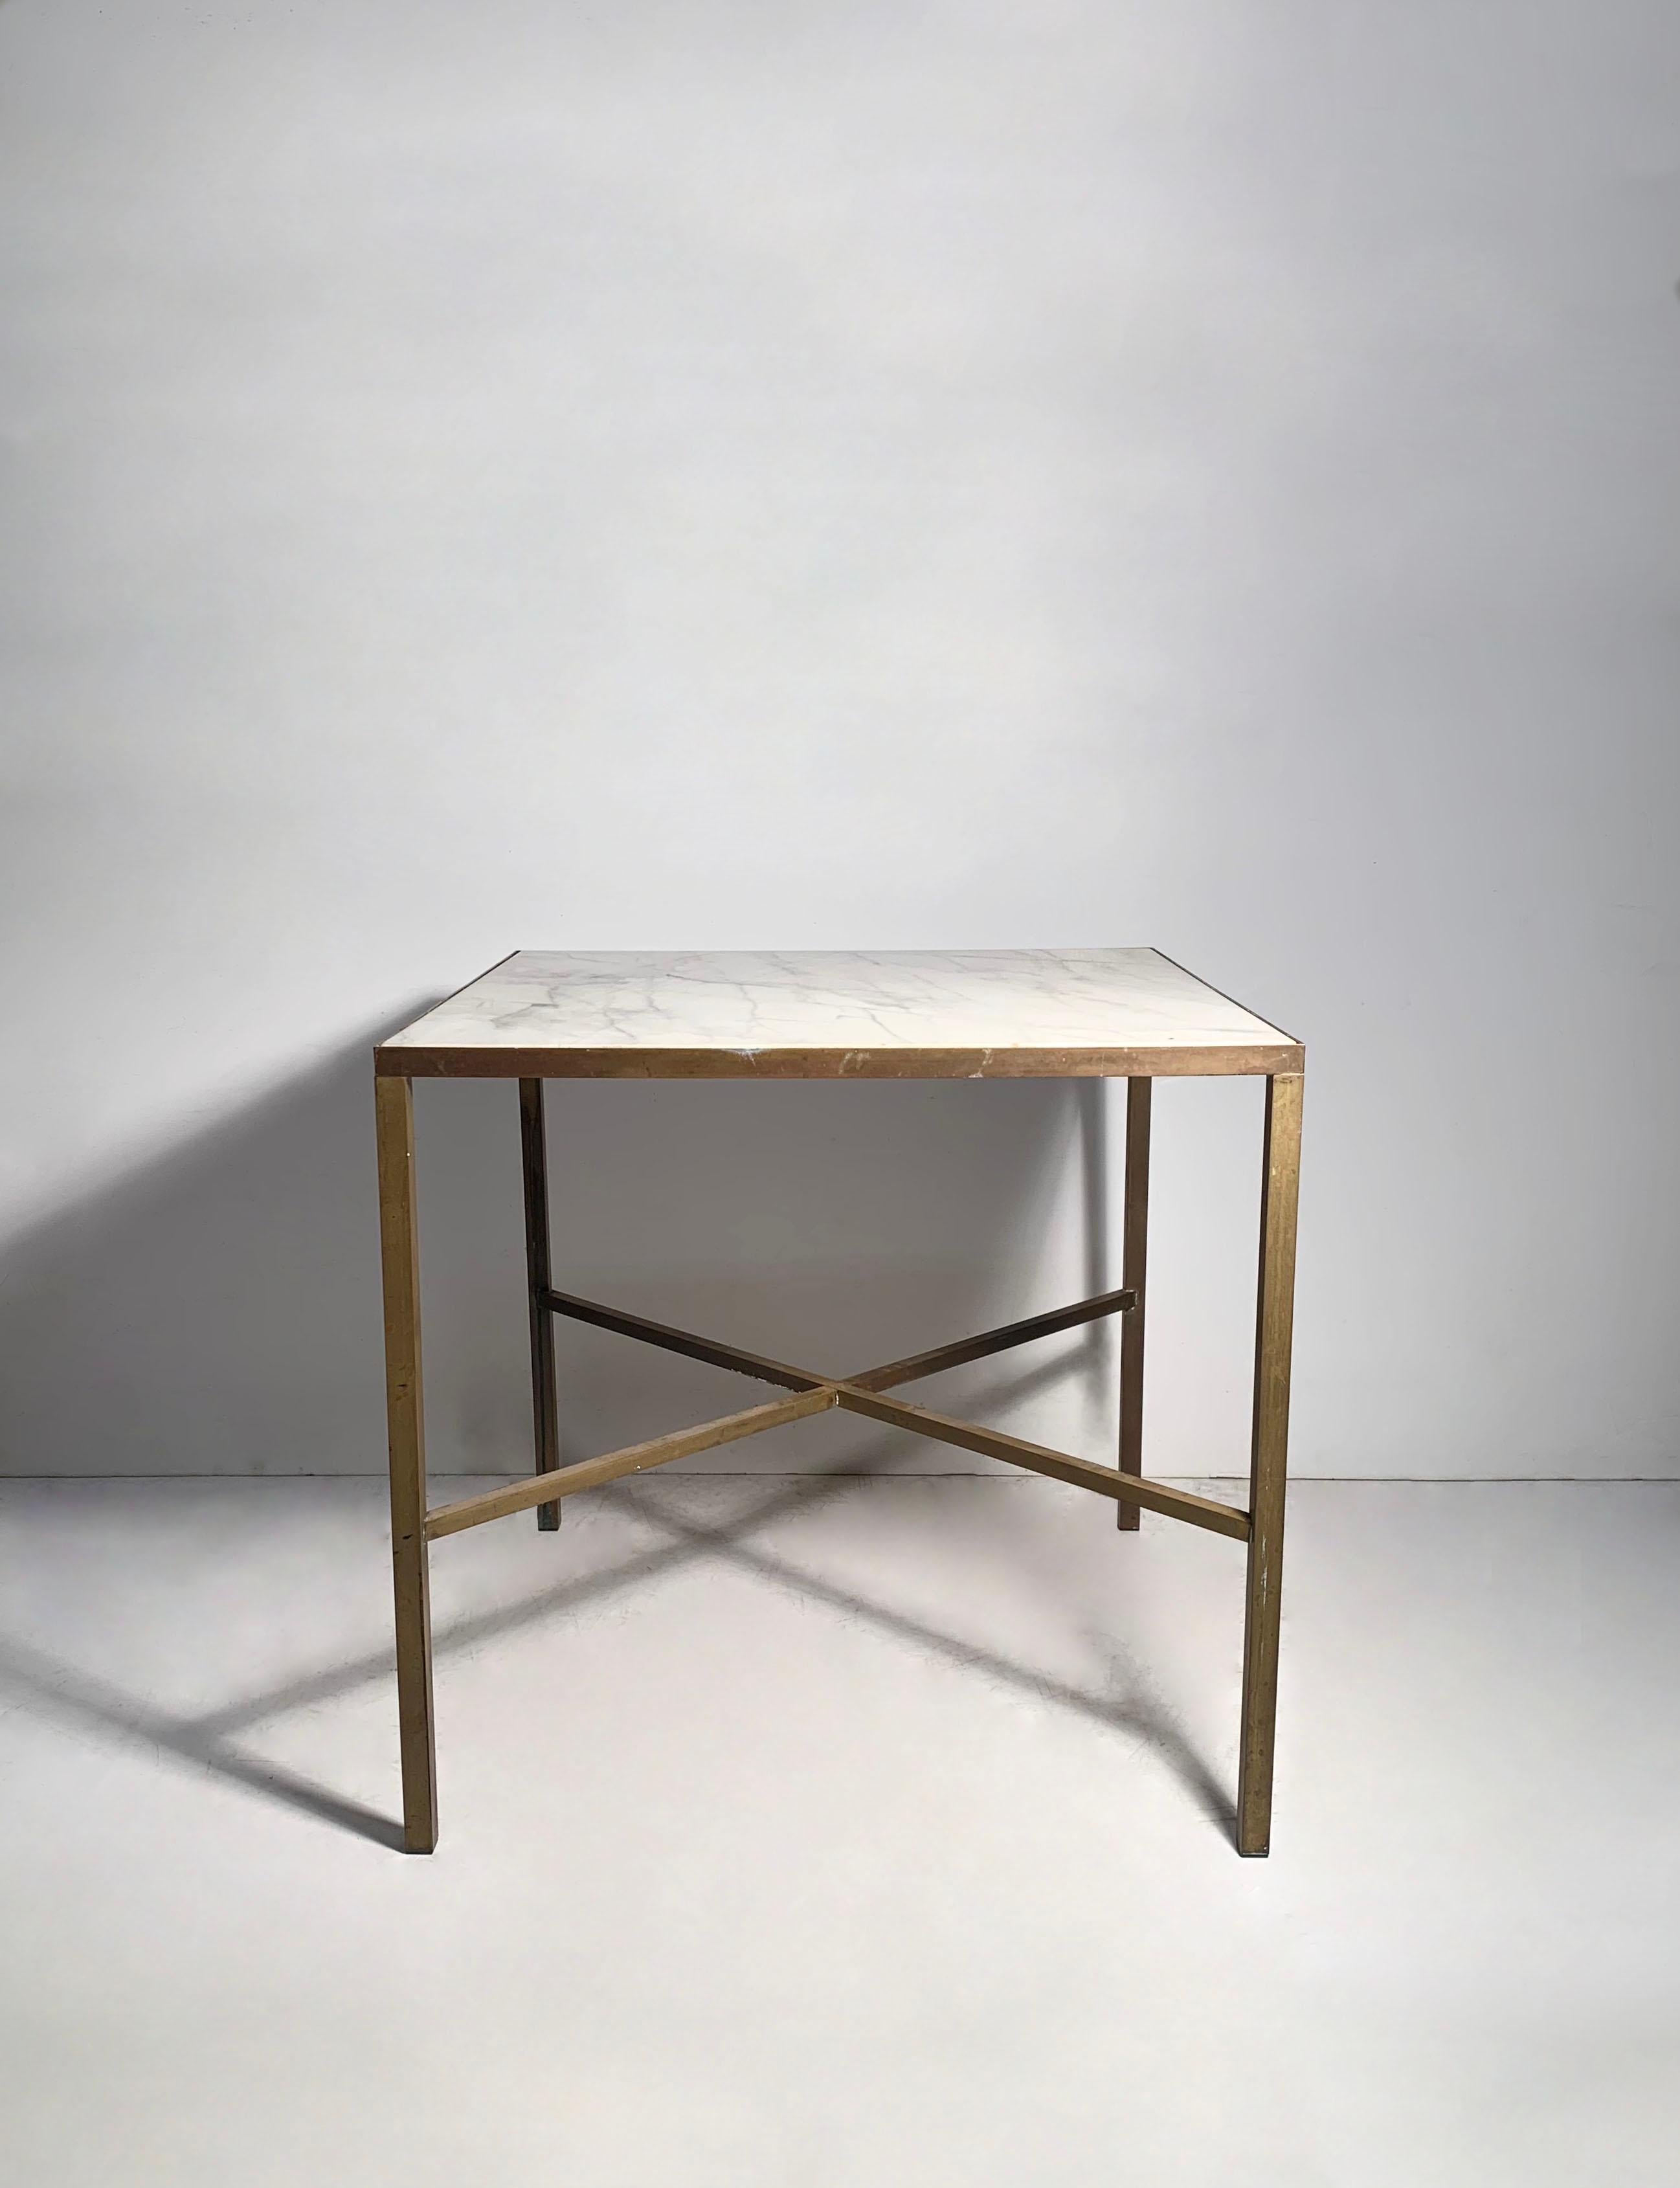 A rare architectural brass dinette table with X stretcher and a beautiful original marble top.  Attributed to Paul McCobb. Still researching to determine the exact model and line.  A very clever construction the way this was factory assembled,  No